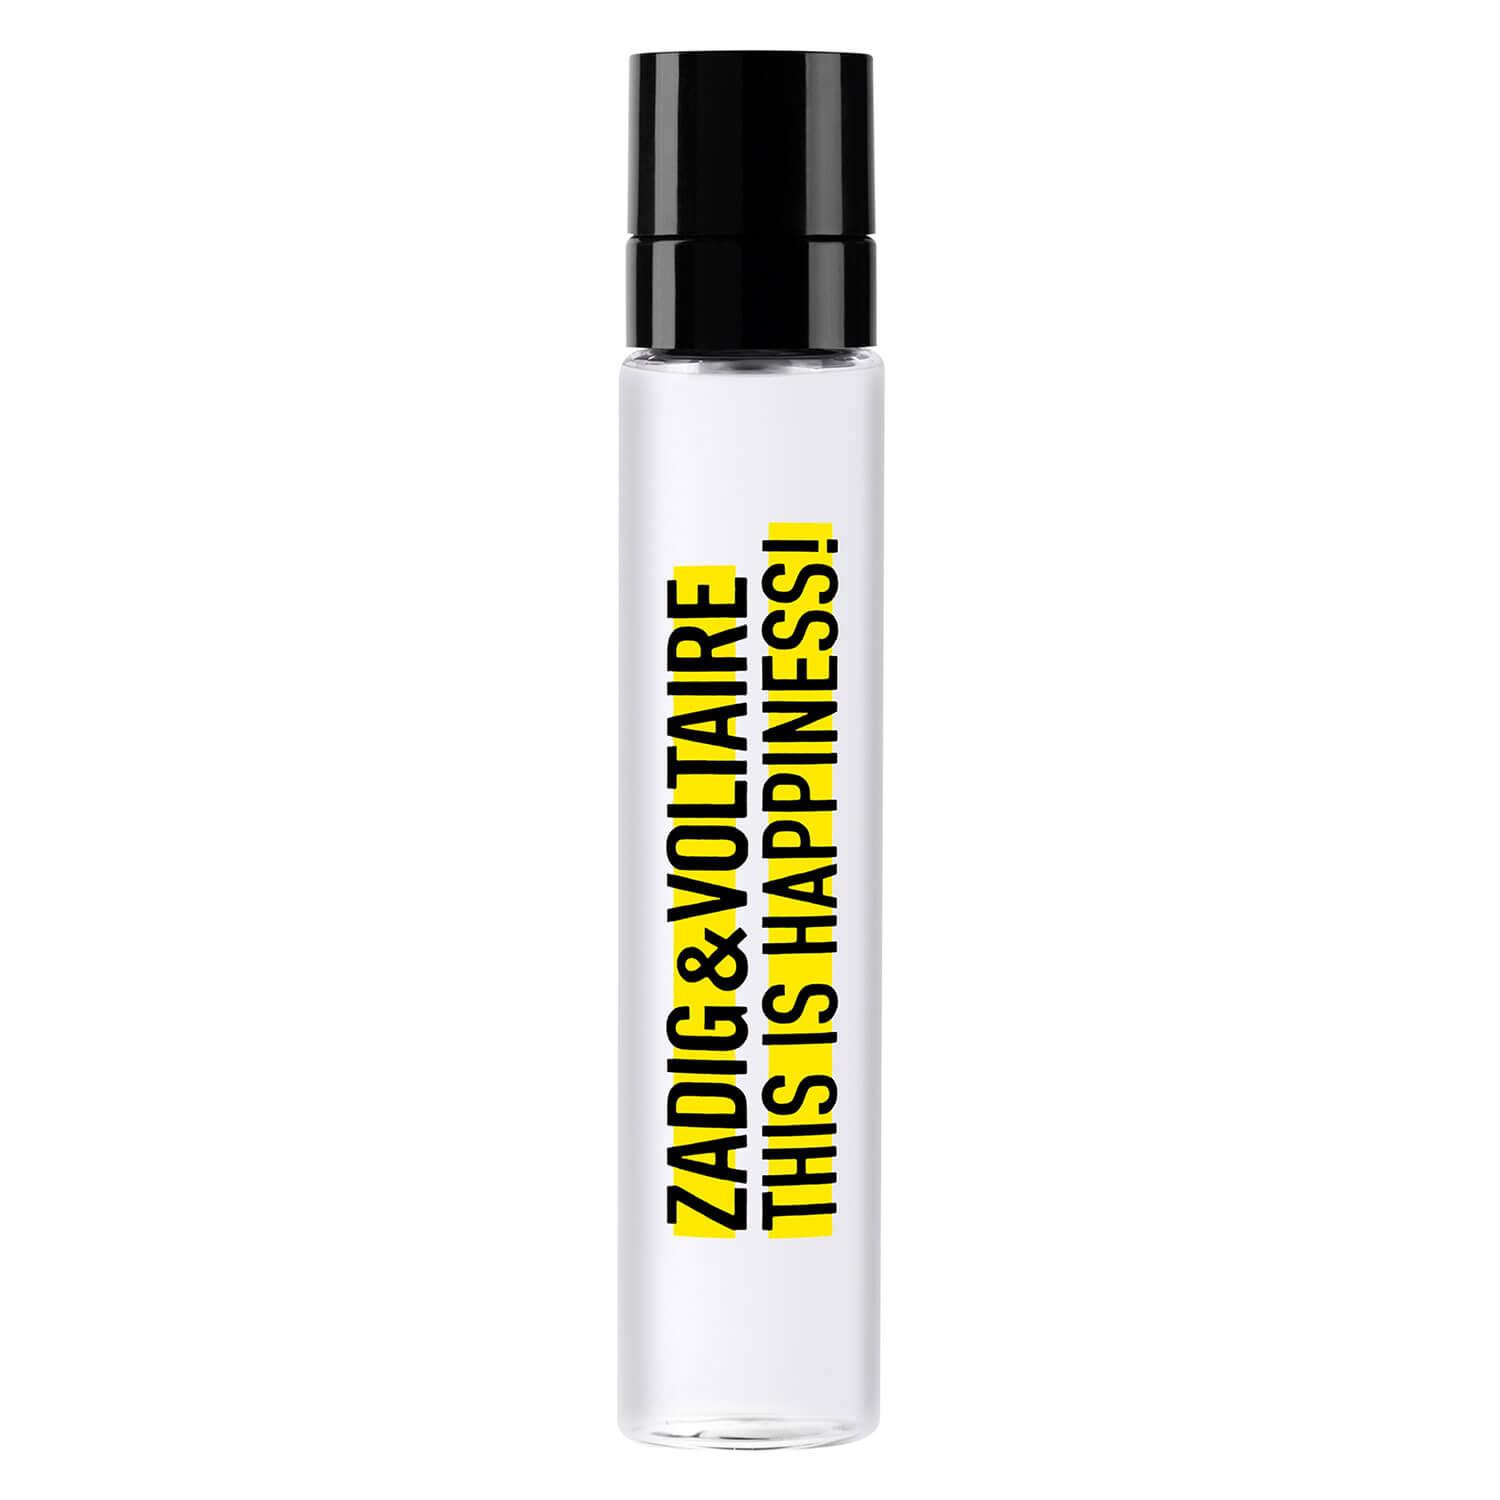 THIS IS - HAPPINESS! EdT Fragrance Booster